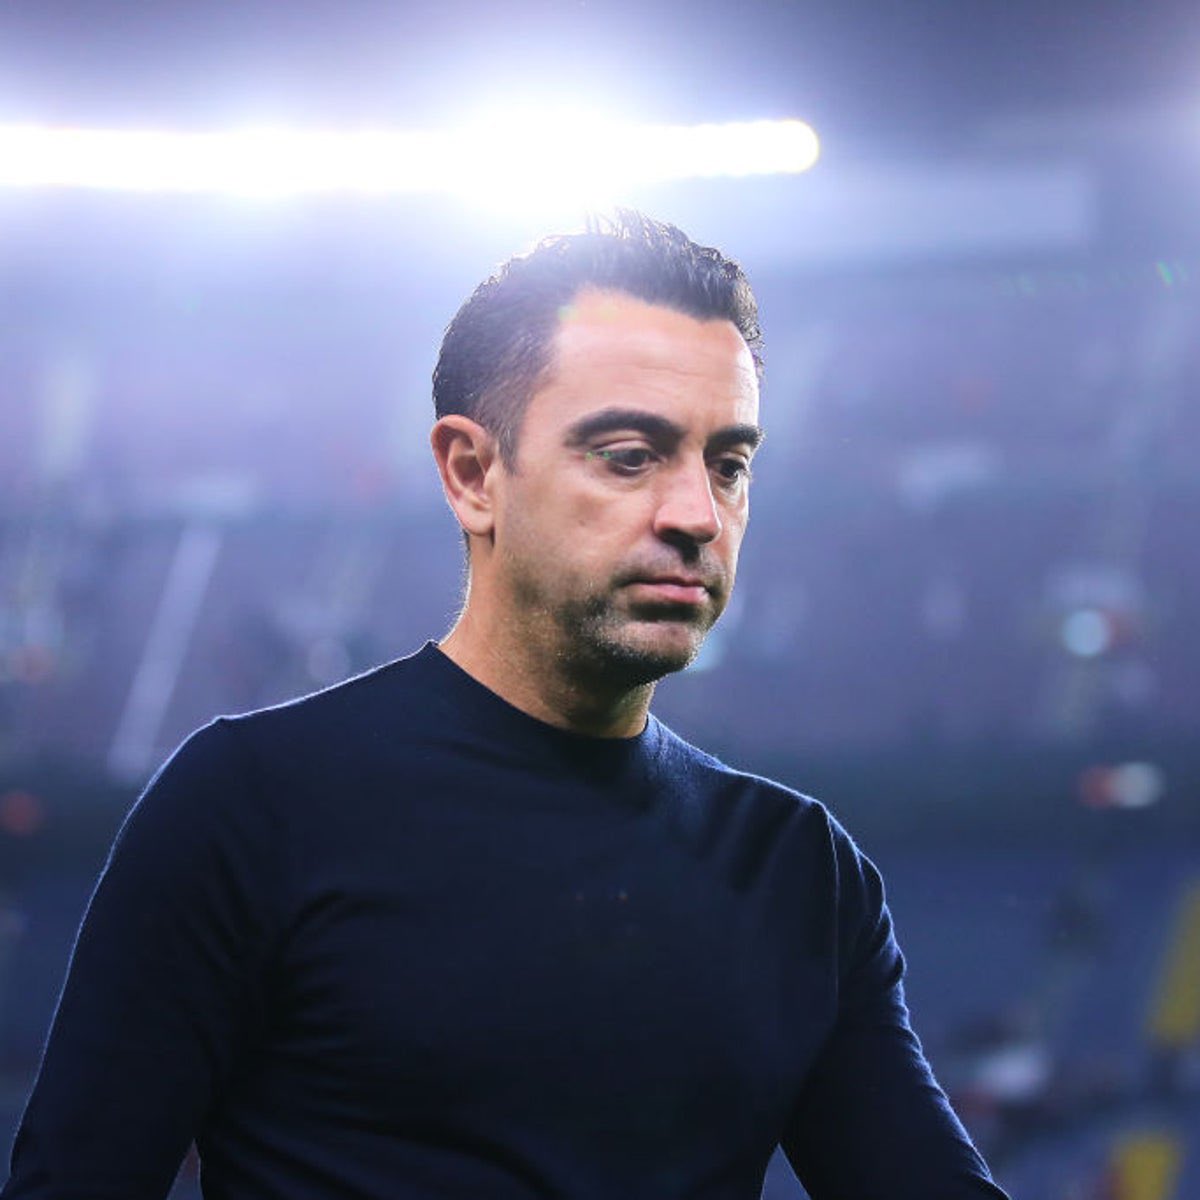 🚨 - JUST IN: Ajax & Xavi held extensive talks and Xavi got excited about the new project, until he told Ajax he wants to take a sabbatical year. Ajax were surprised to find out that instead he suddenly announced to stay at Barcelona. [@telegraaf]